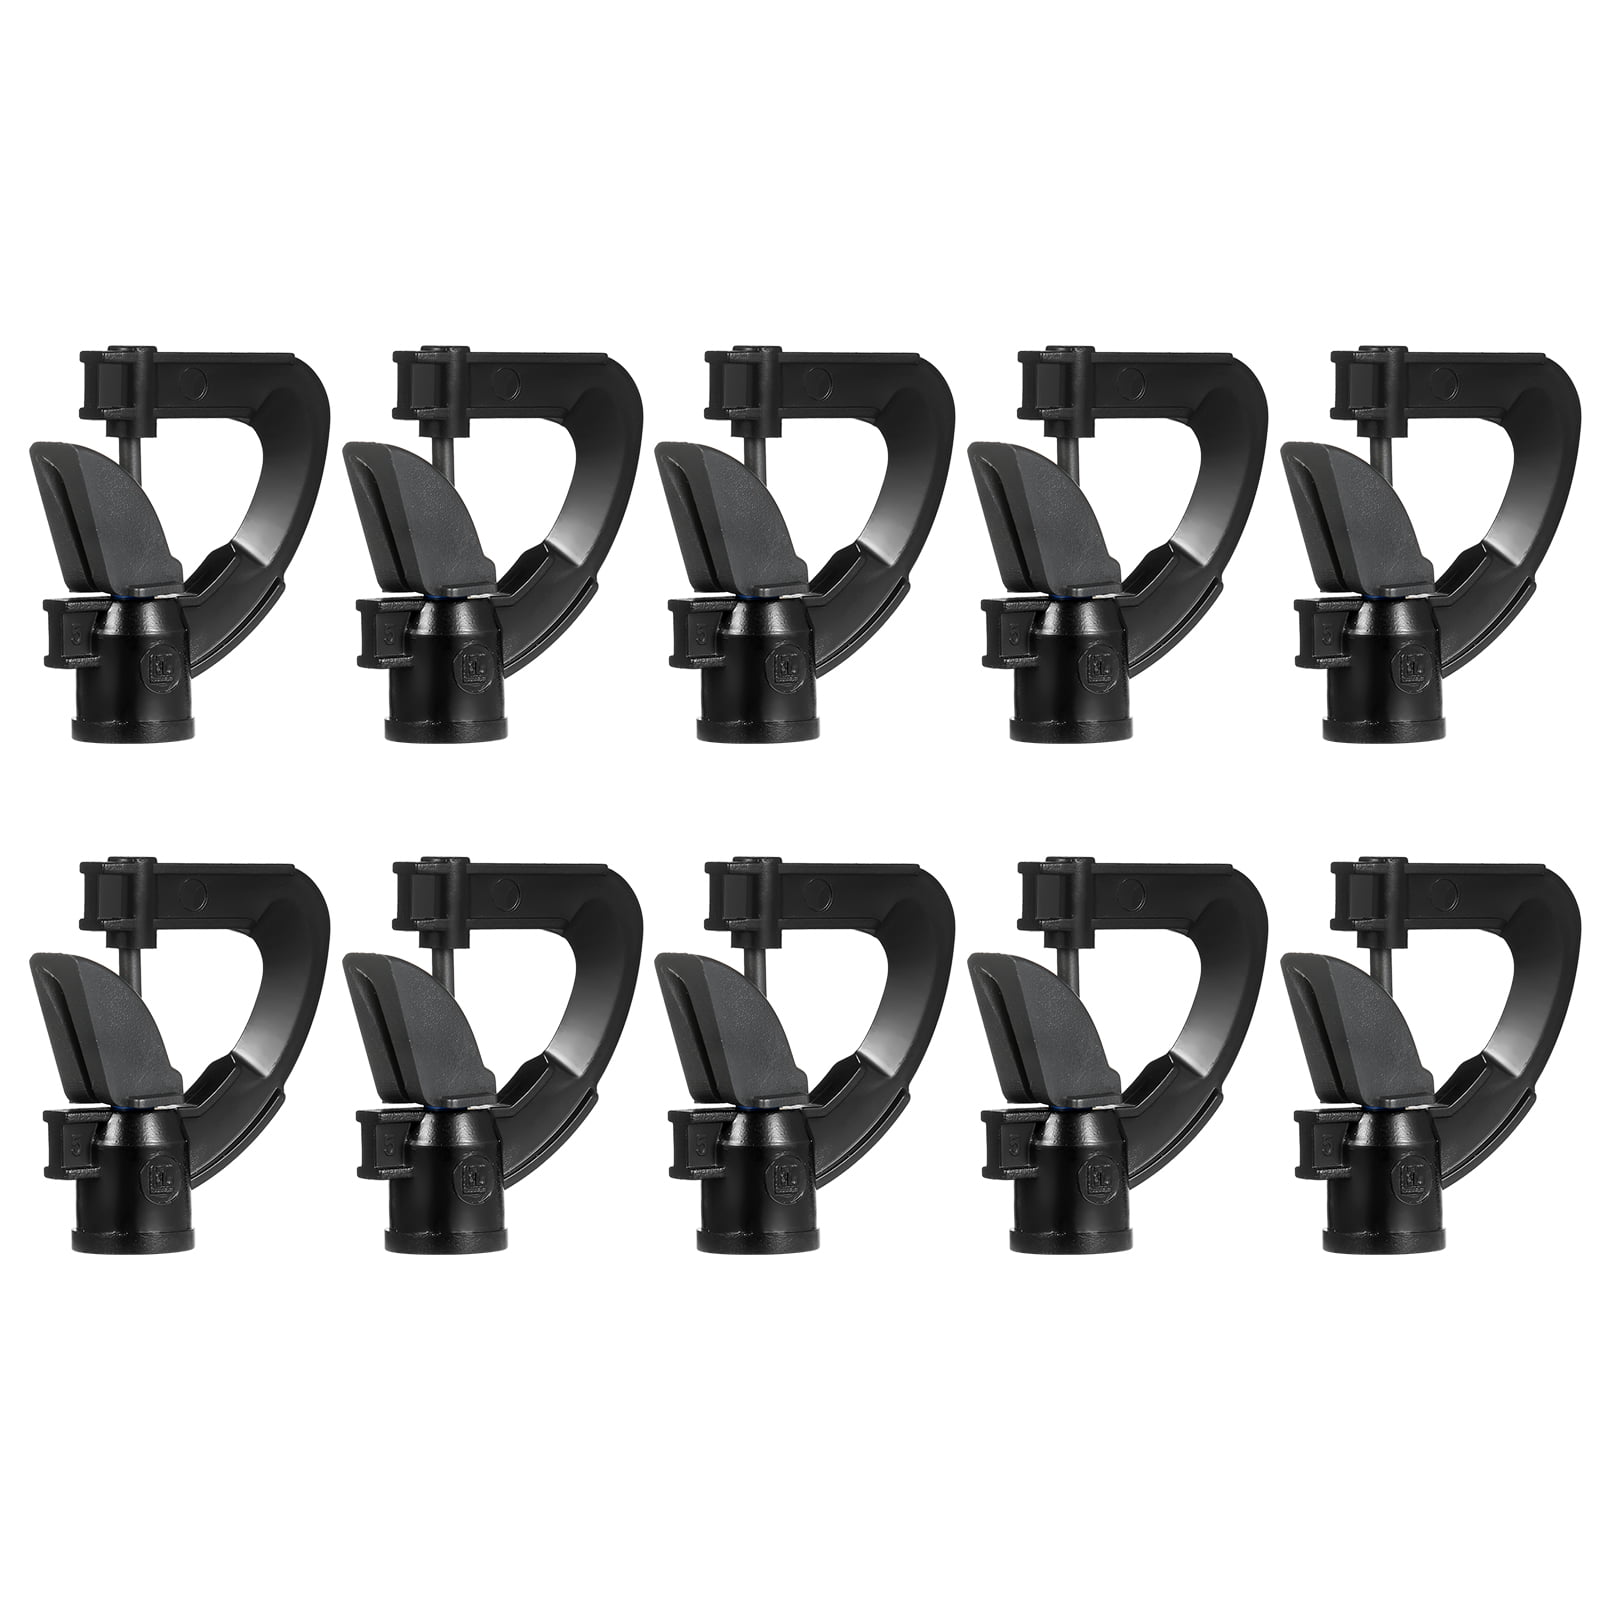 10pcs Inverted Lawn Water Flow Irrigation Rotating Micro Spray Nozzle Sprinkler 